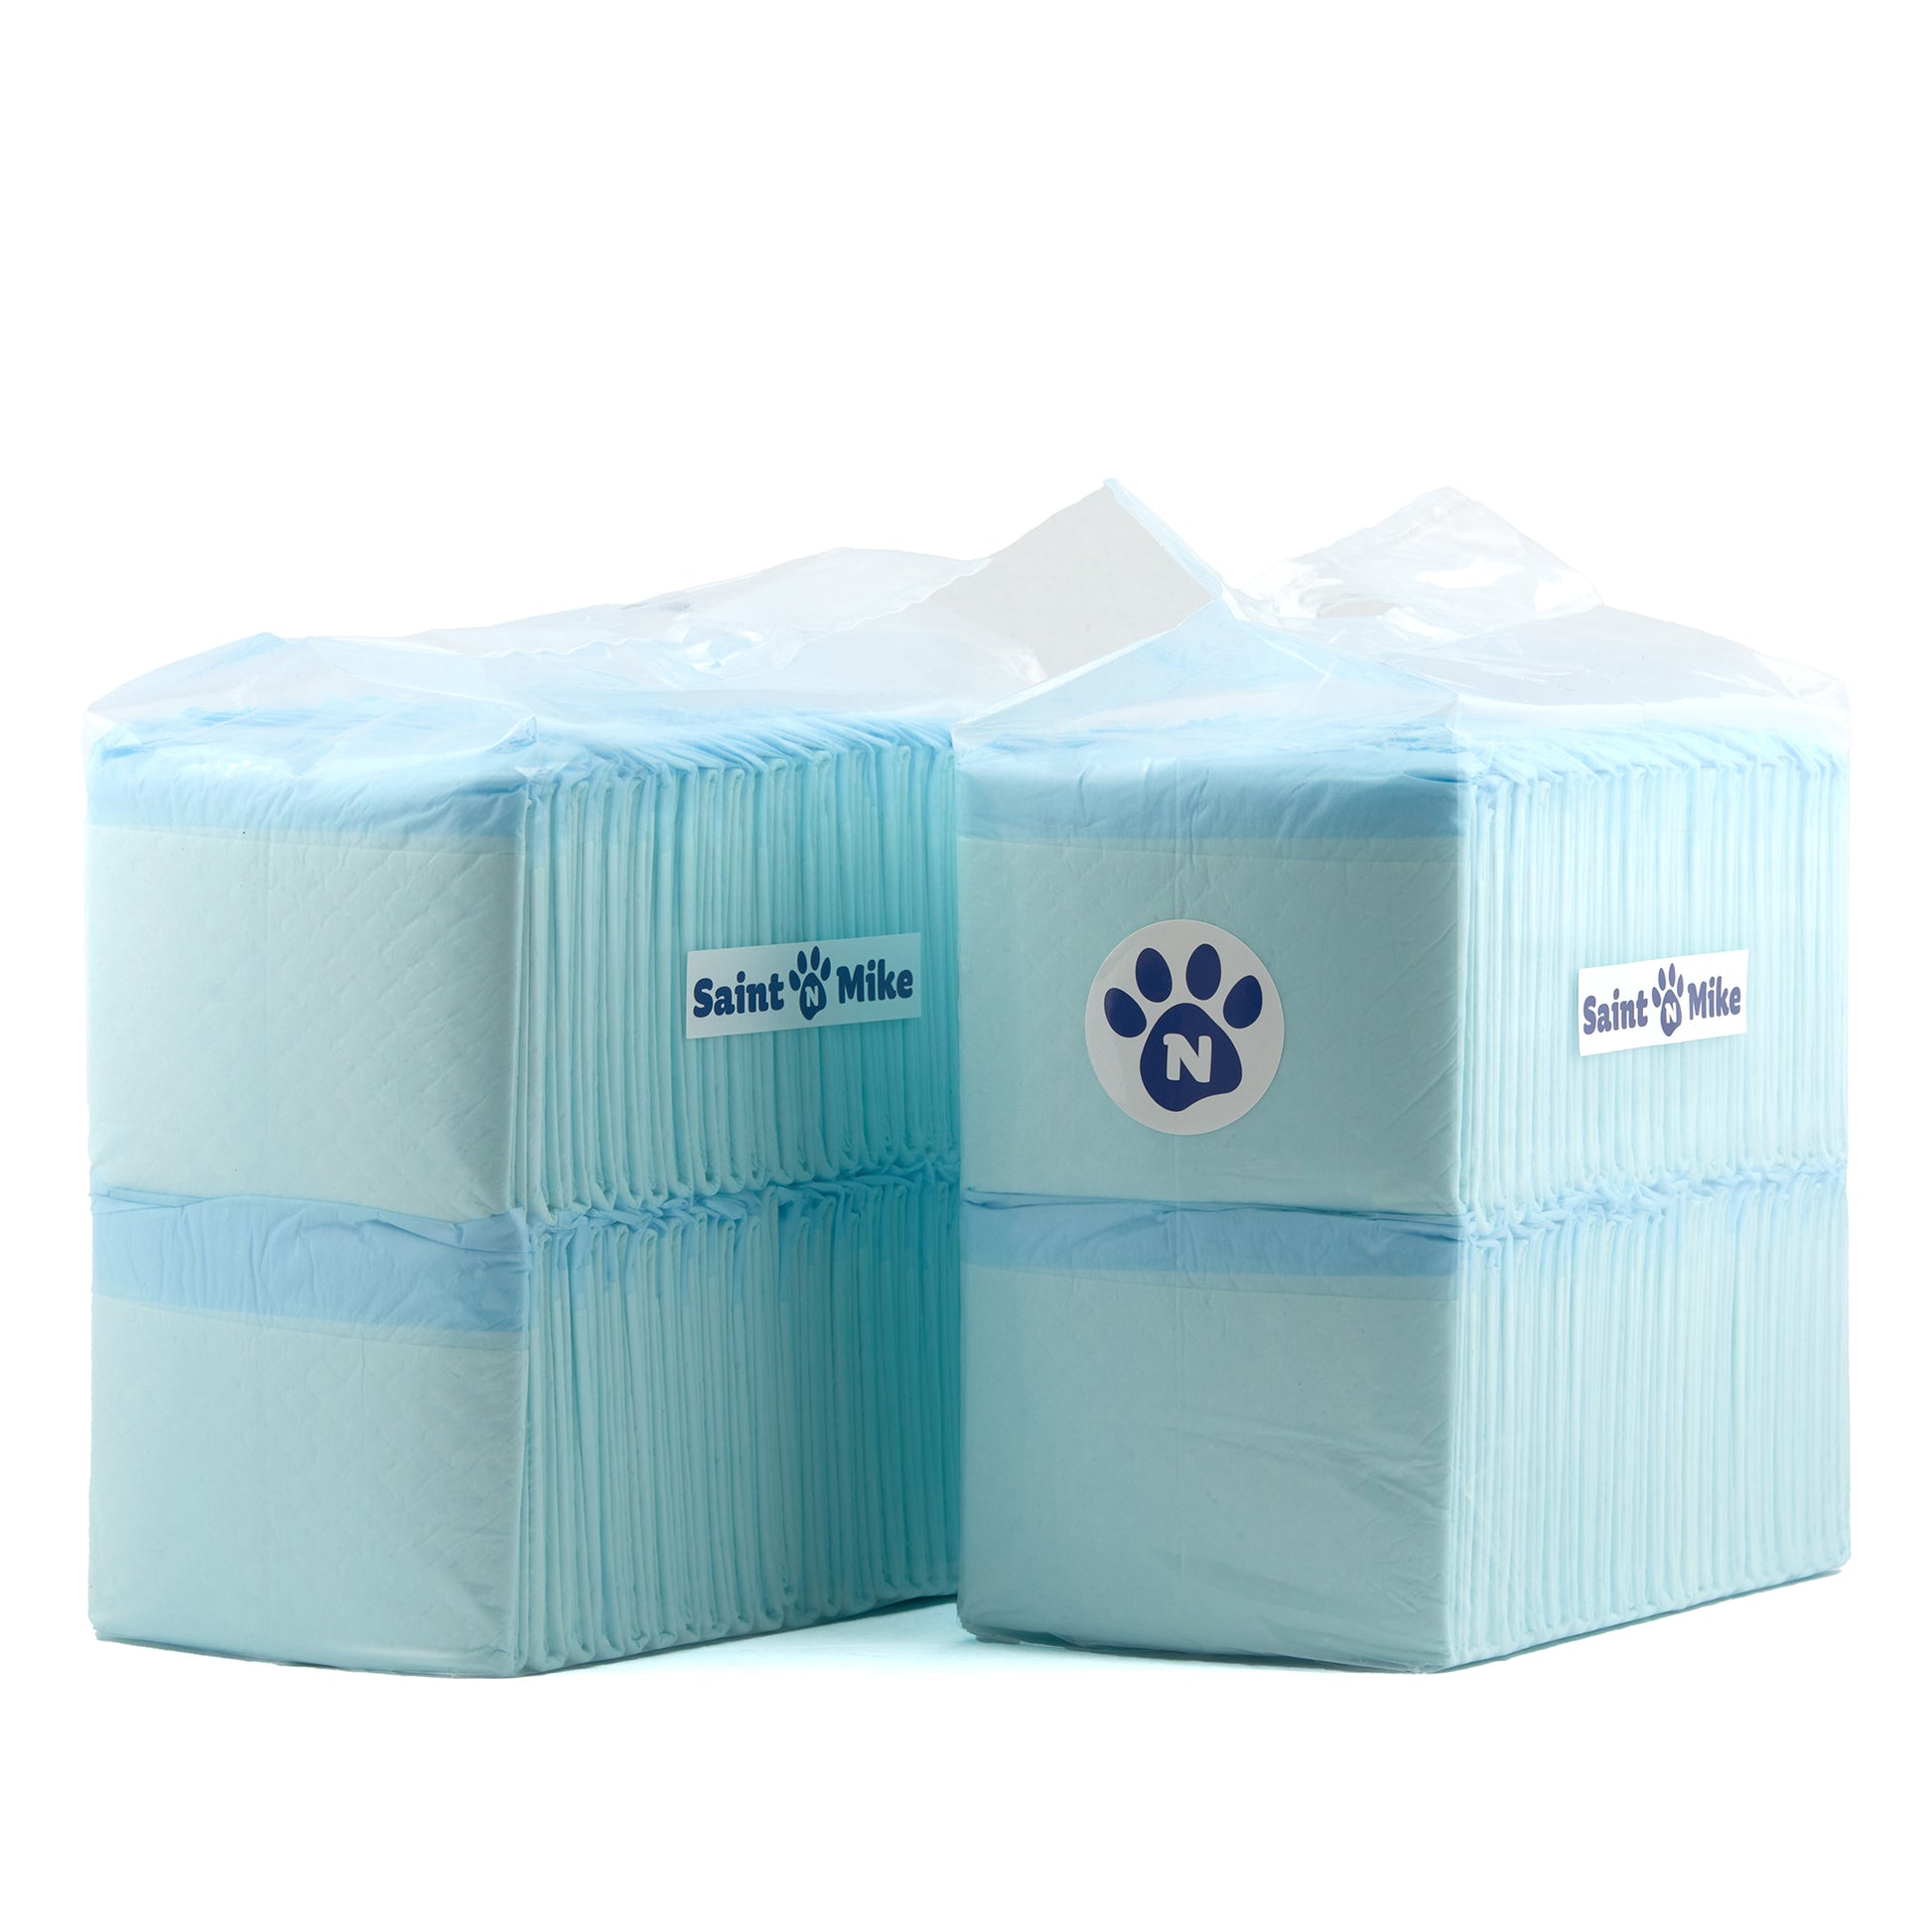 medium size, 100 count high-quality puppy pad leak-proof for hassle-free house training1